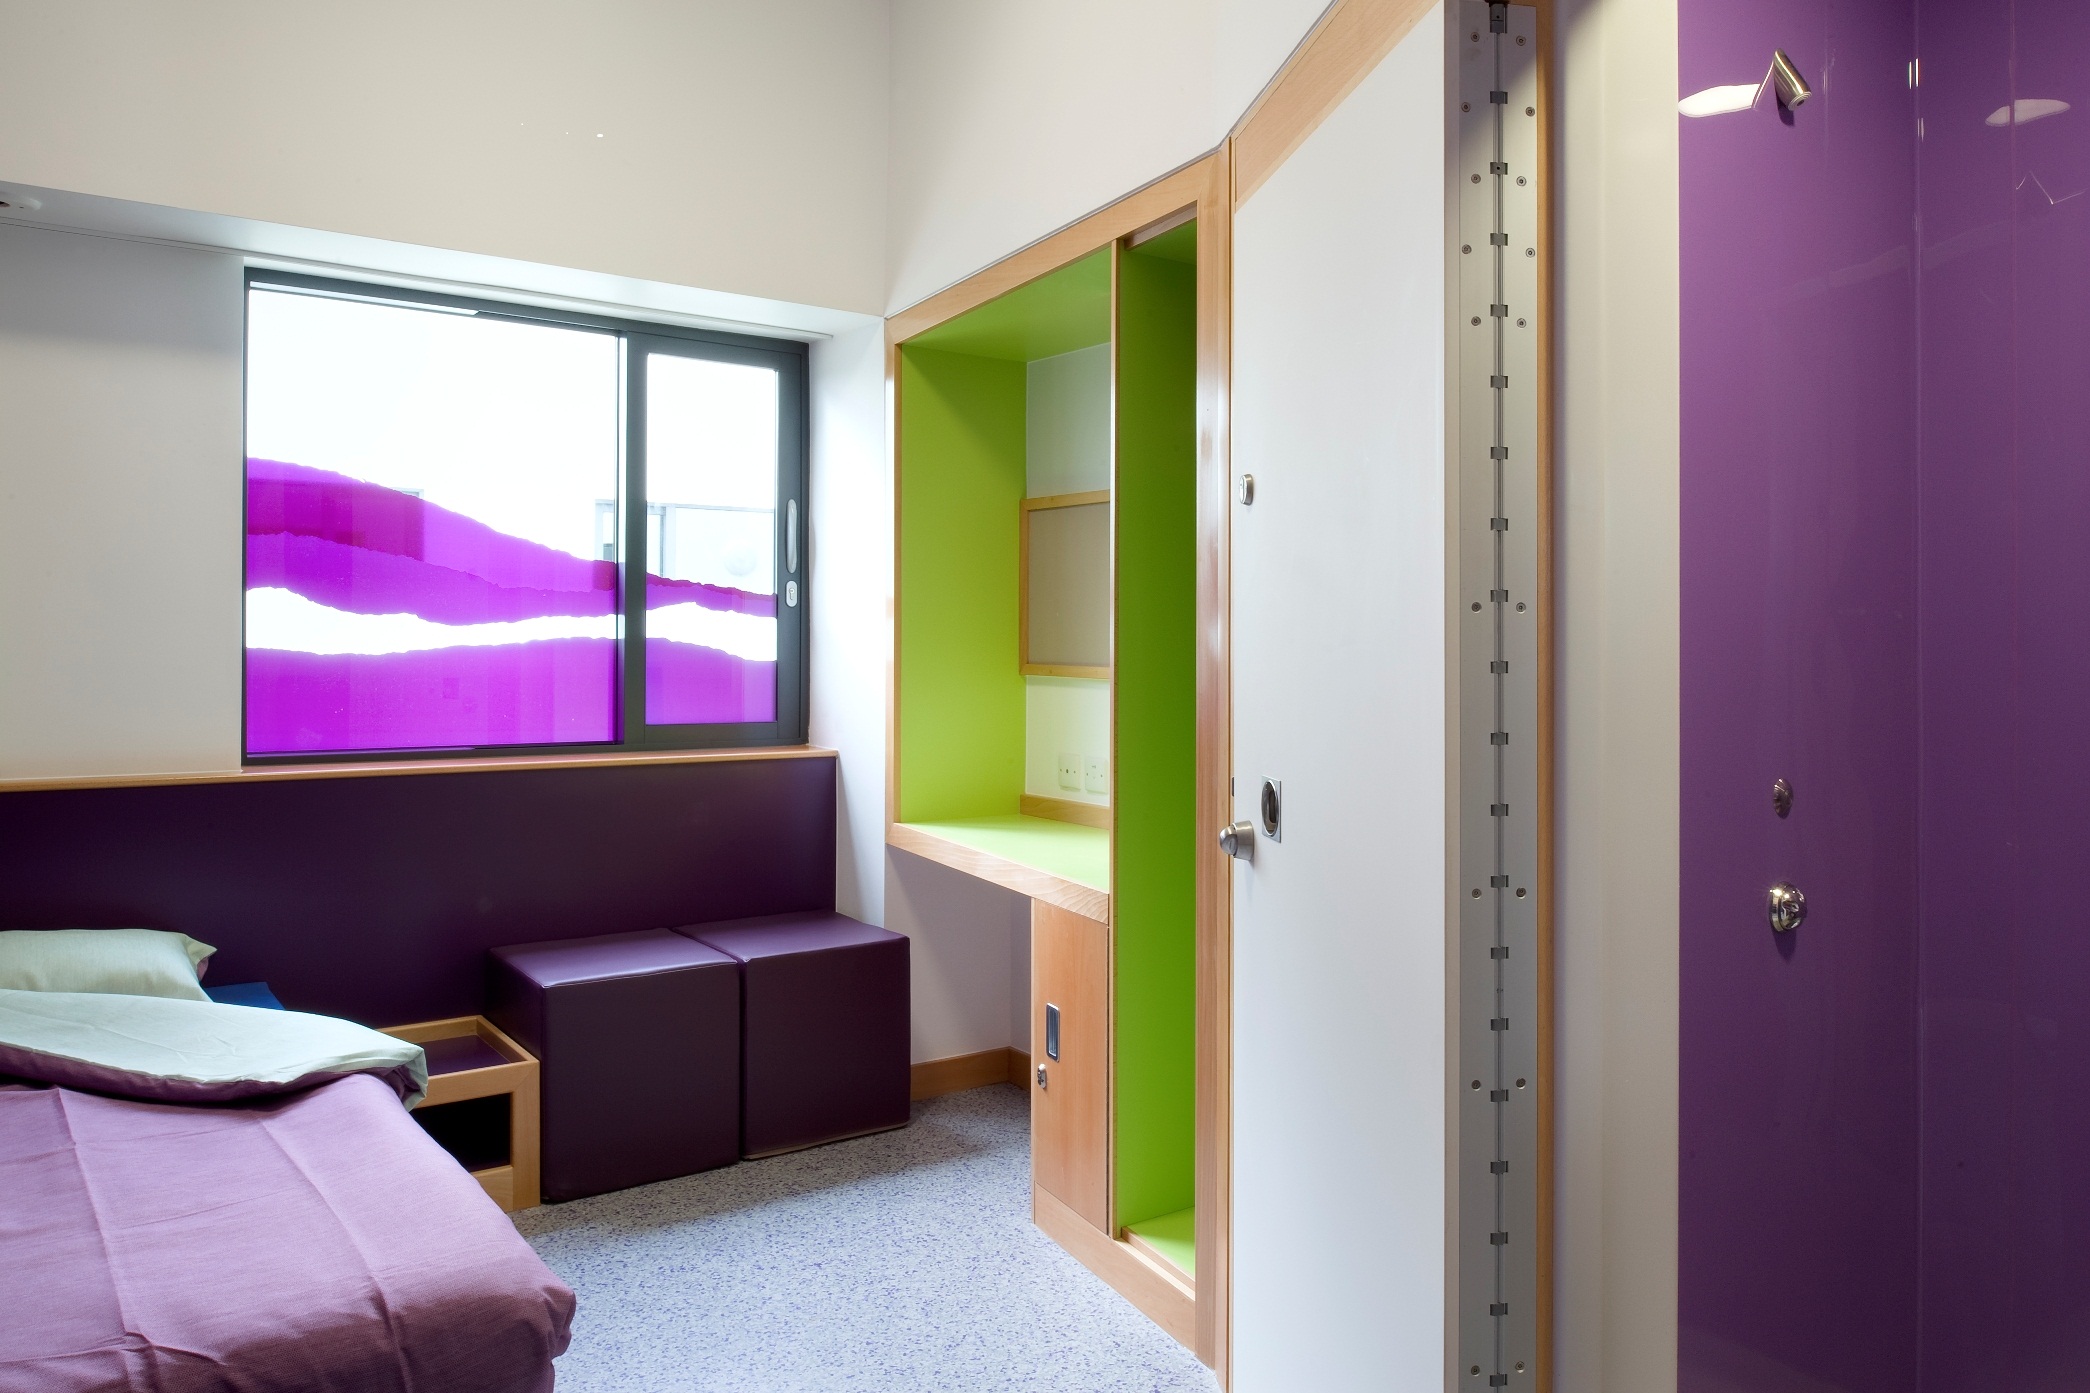 40 different colours of Altro flooring were used at the Ferndene Children and Young People’s Centre in Northumberland